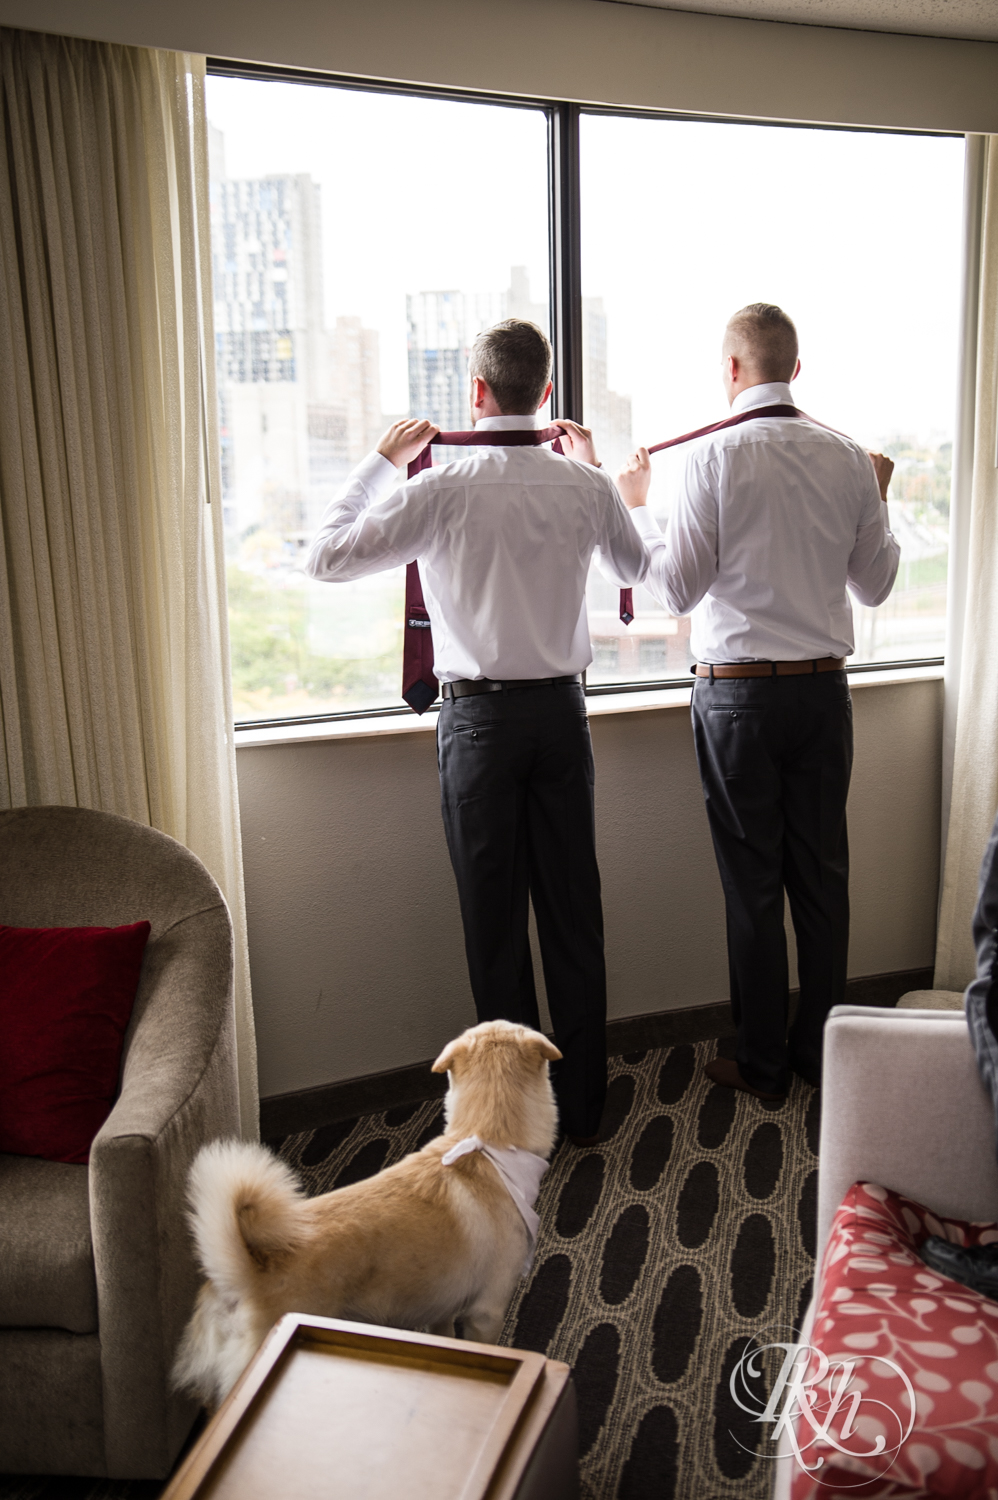 Dog watches grooms getting ready for wedding at Courtyard by Marriott Minneapolis in Minneapolis, Minnesota.